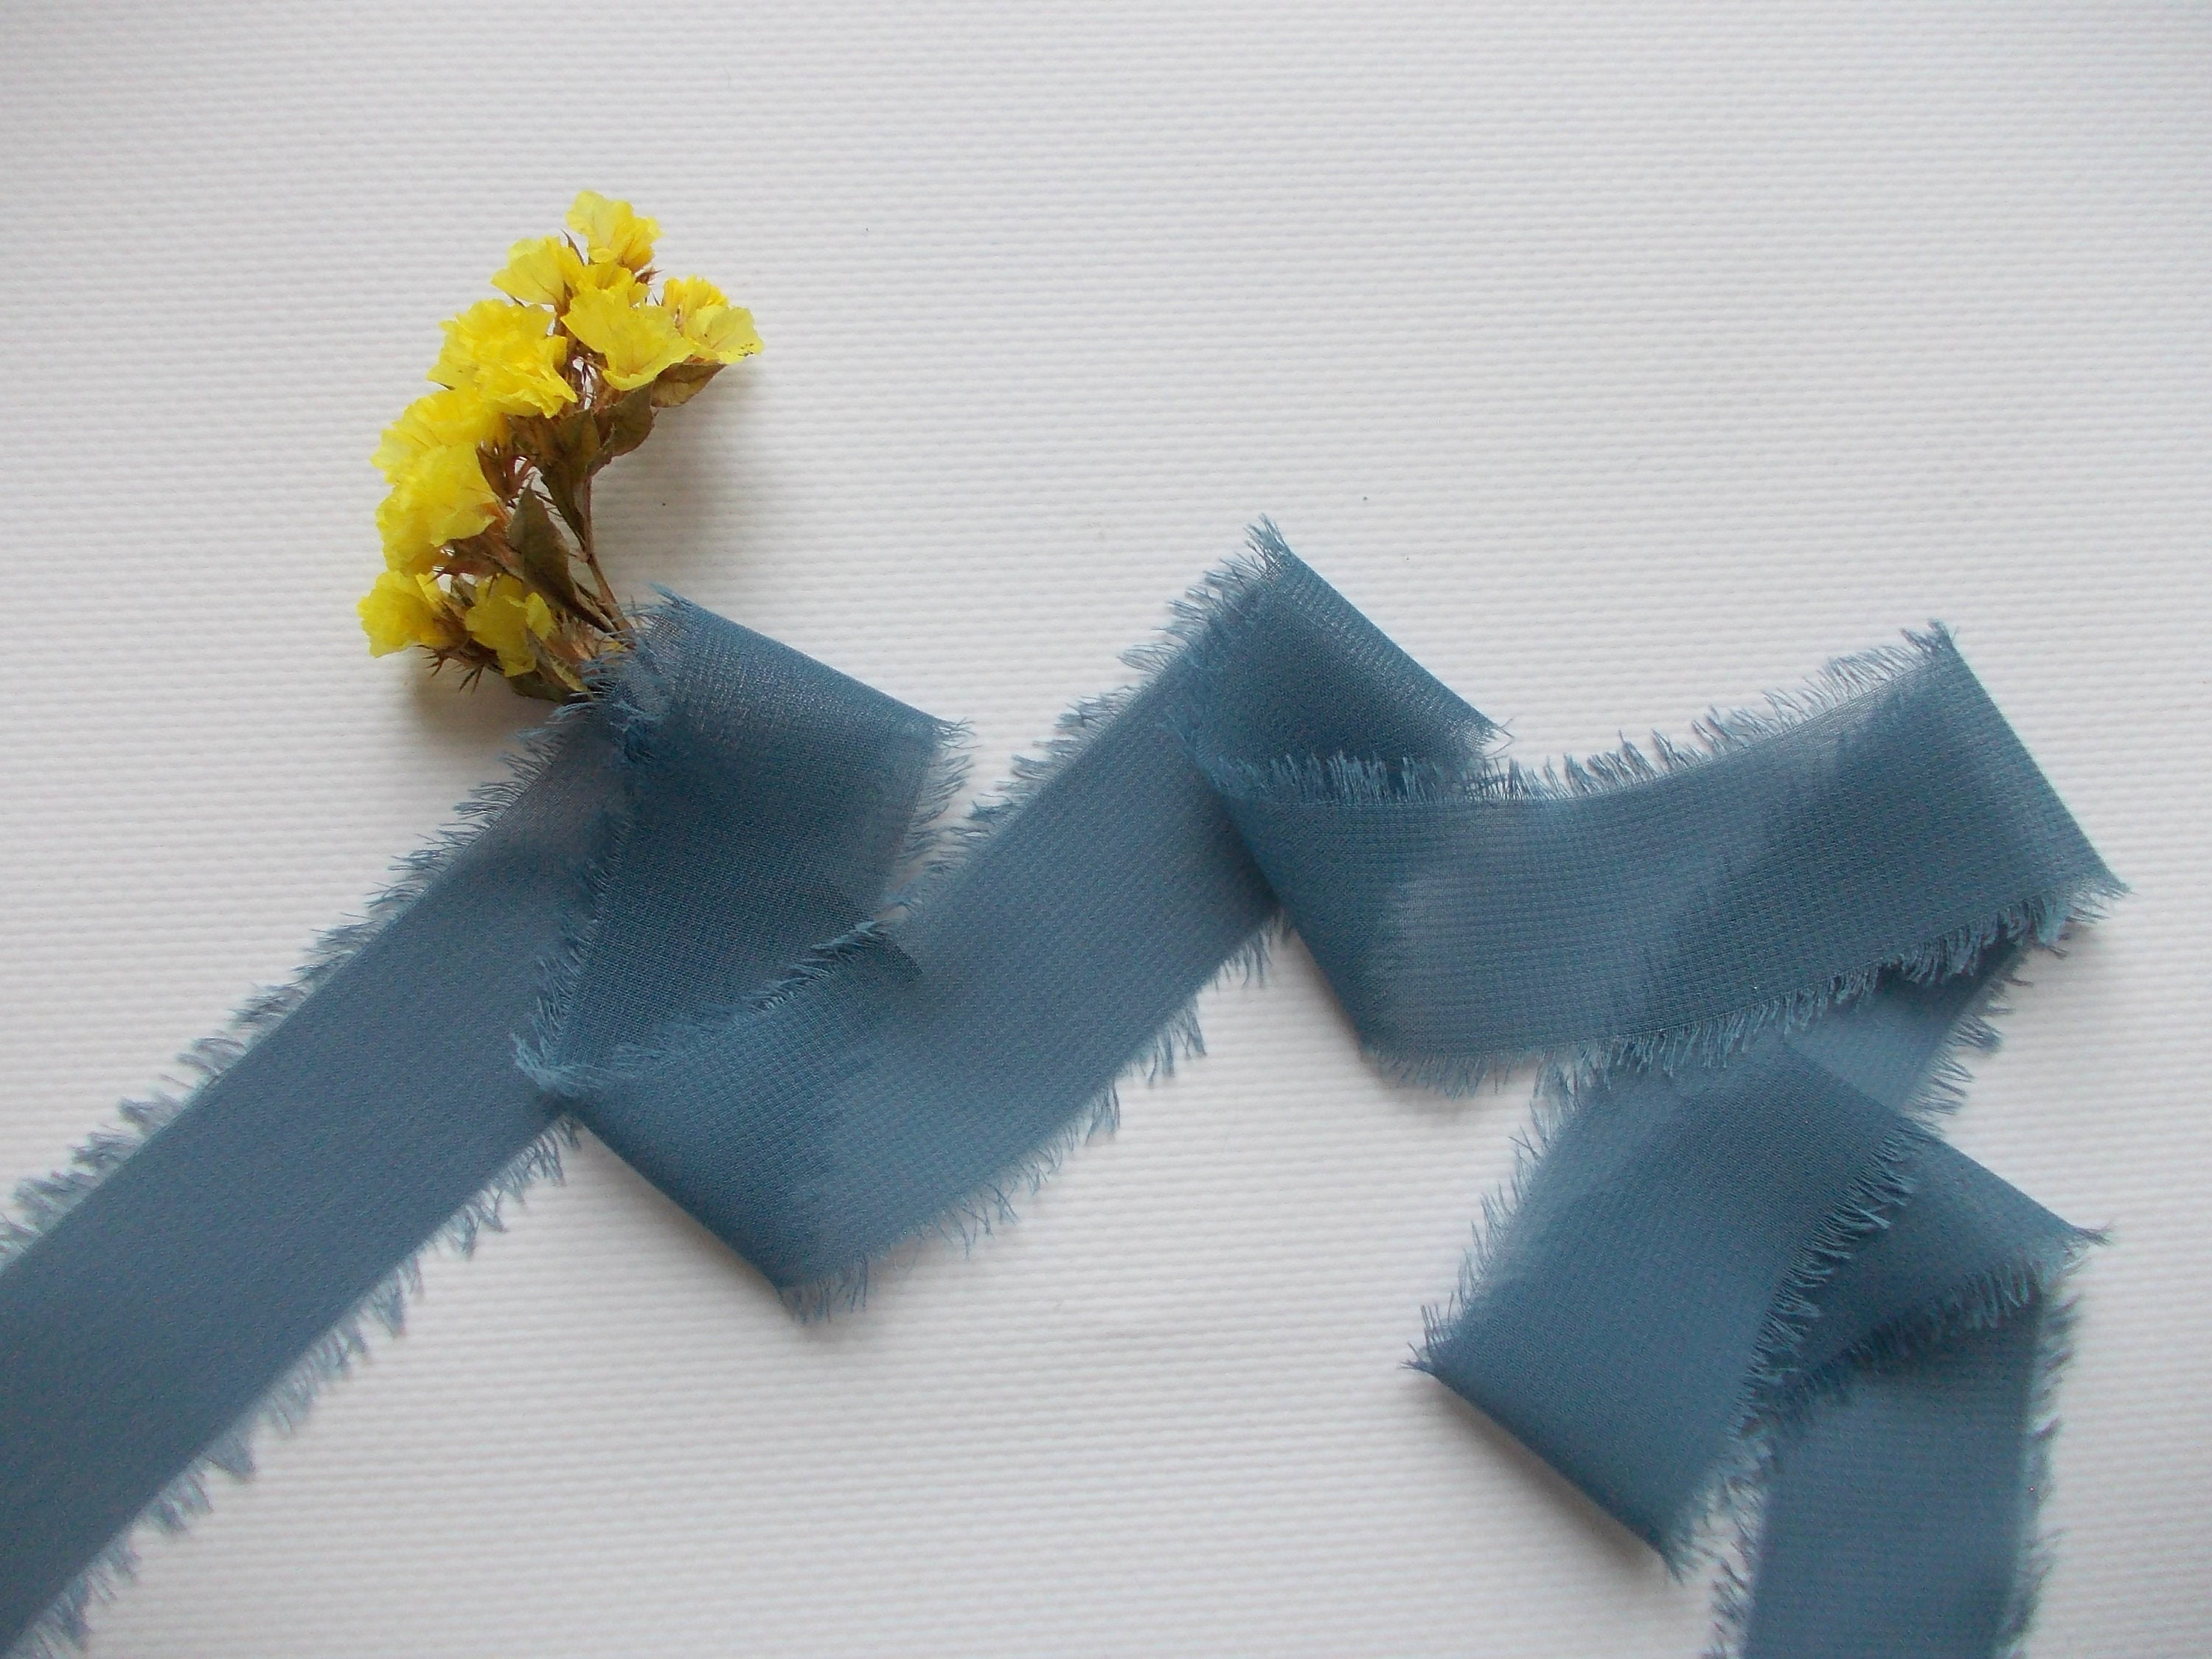 Chiffon Ribbon Dusty Blue Ribbon Fringe Handmade for Wedding Invitations Bridal Shower Bouquets Decorations, Gifts Wrapping, DIY Crafts, Size: 1 PC